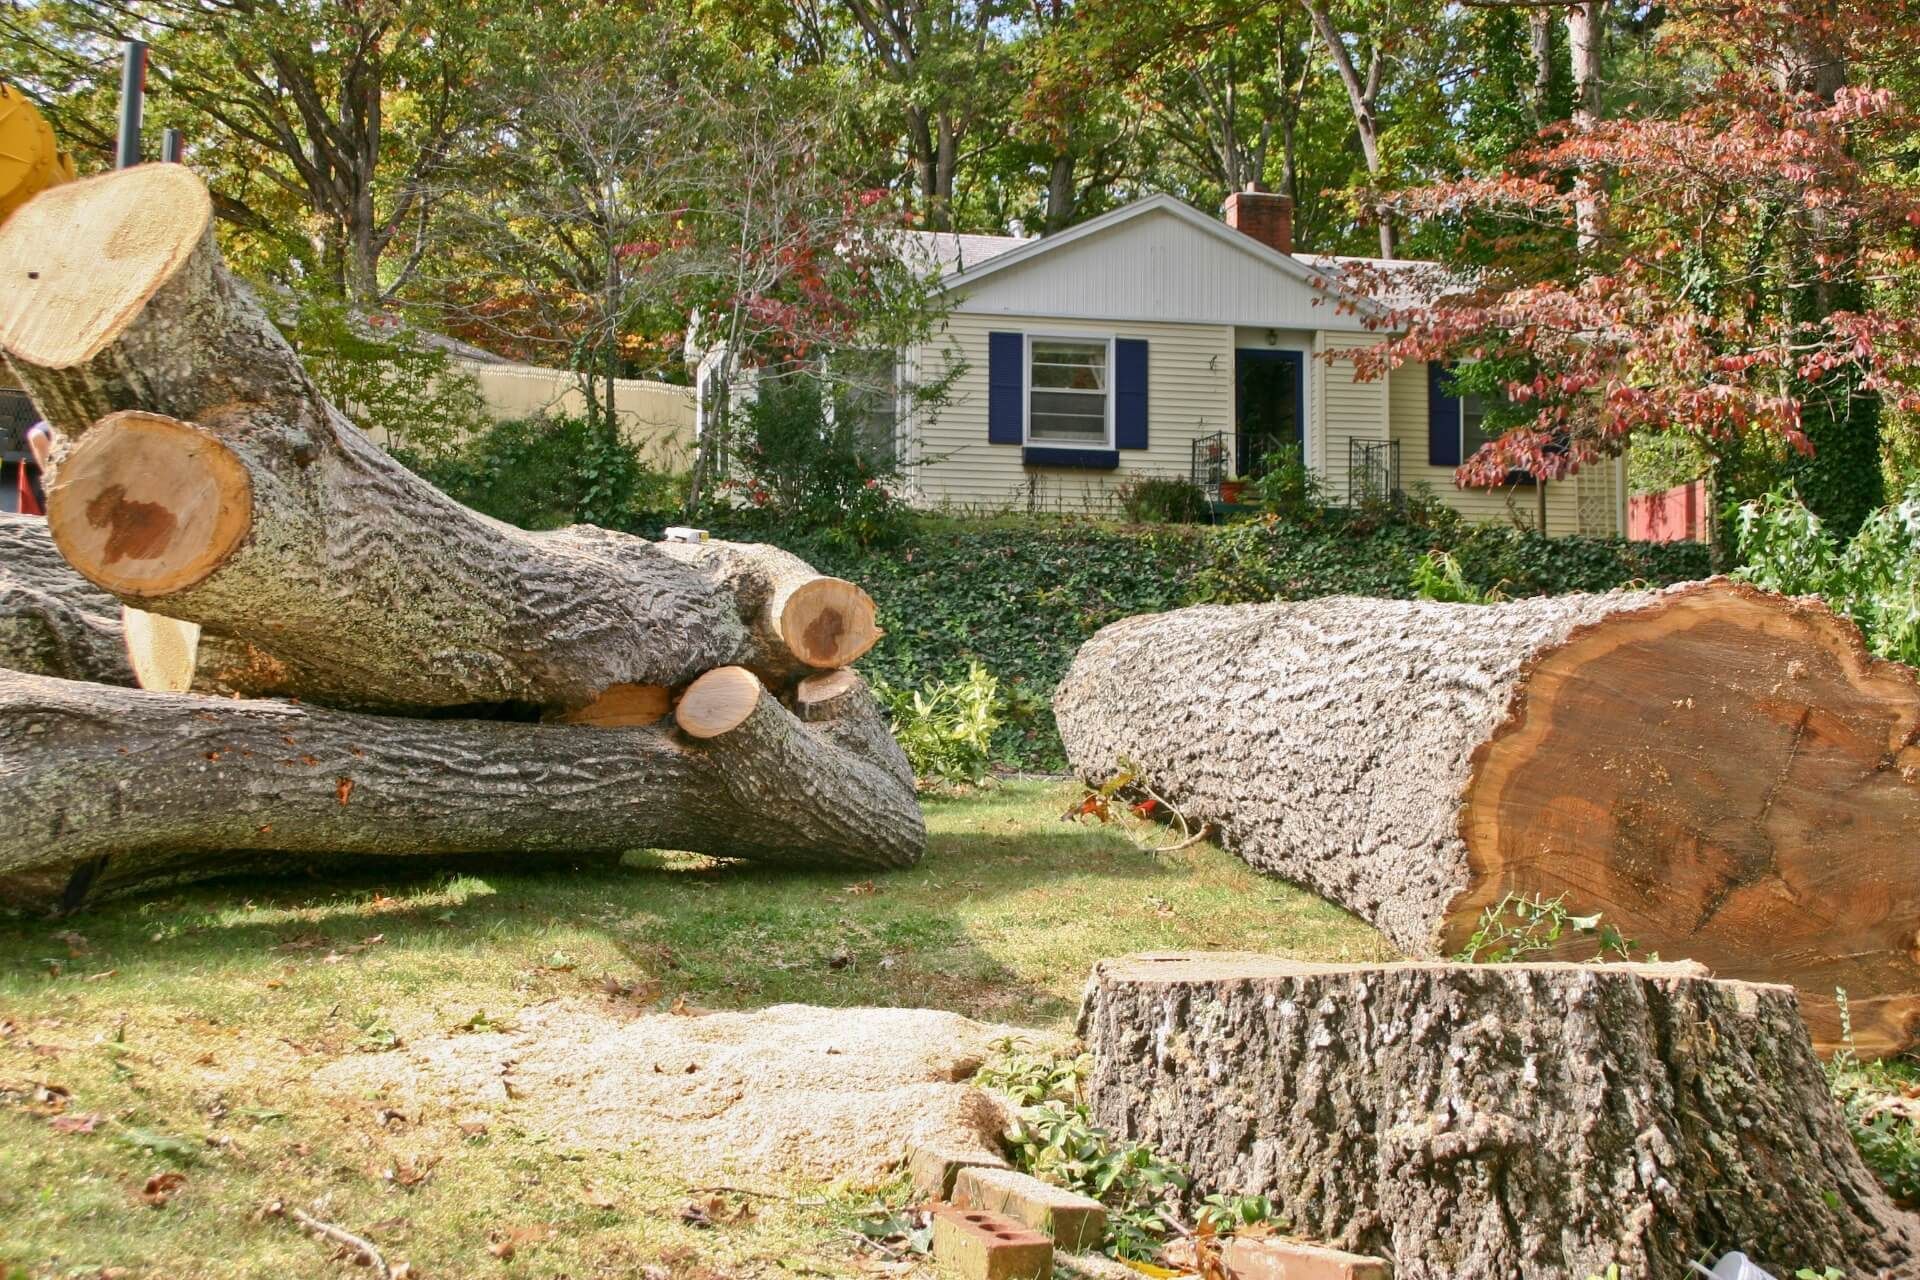 A pile of logs and stump in front of a house